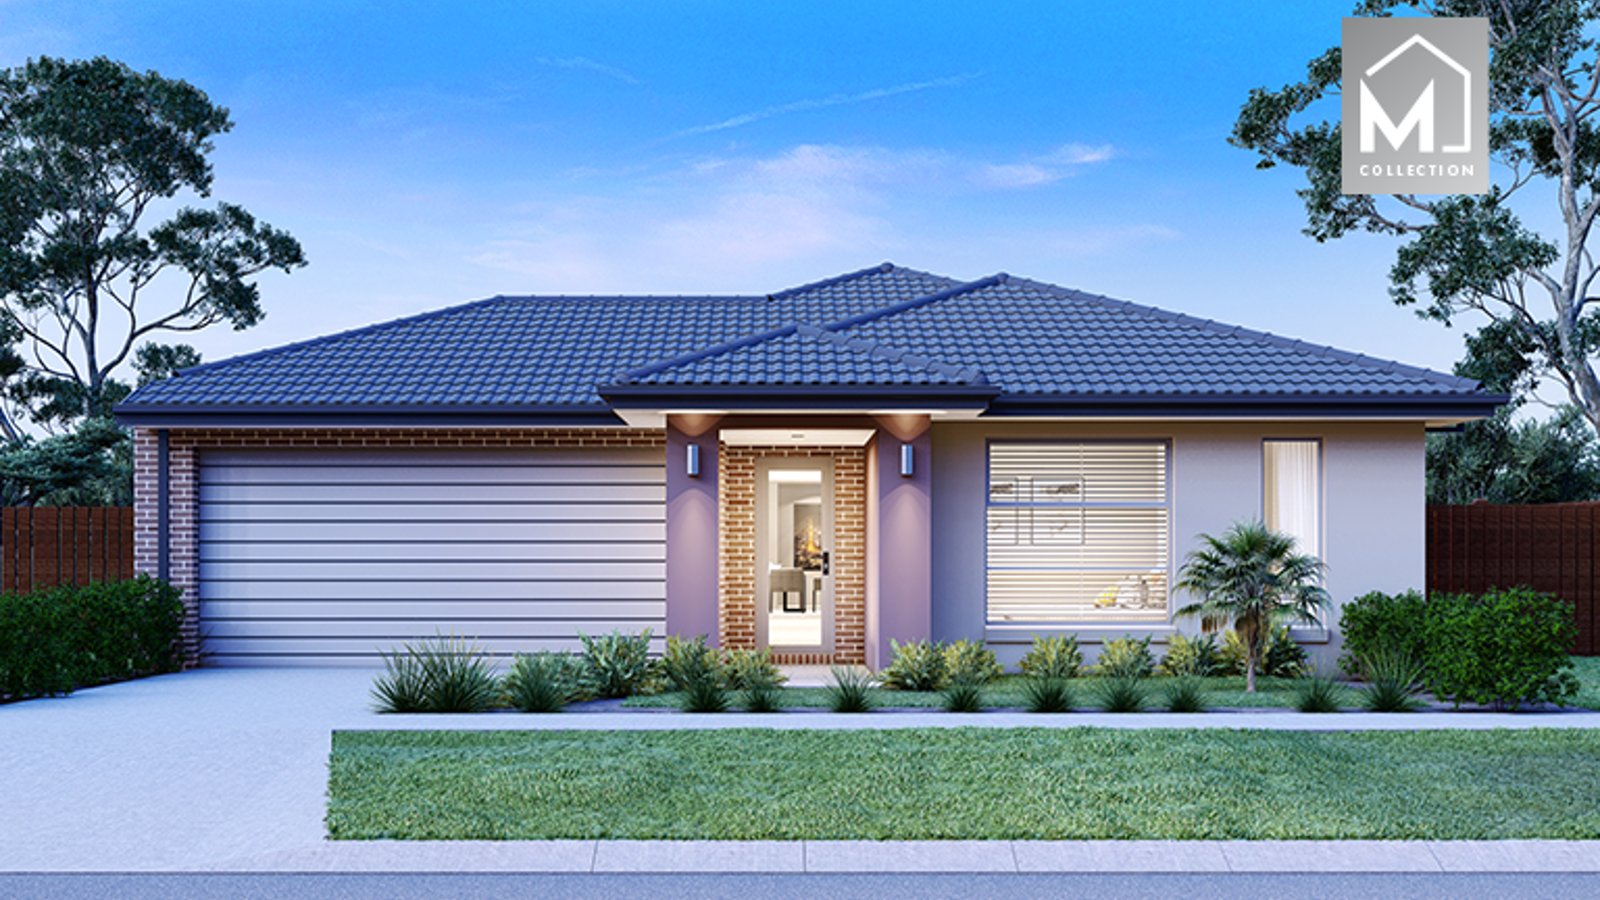 Photo of Lot 1122 Concerto Street - Riverfield Estate, Clyde VIC 3978 AUS